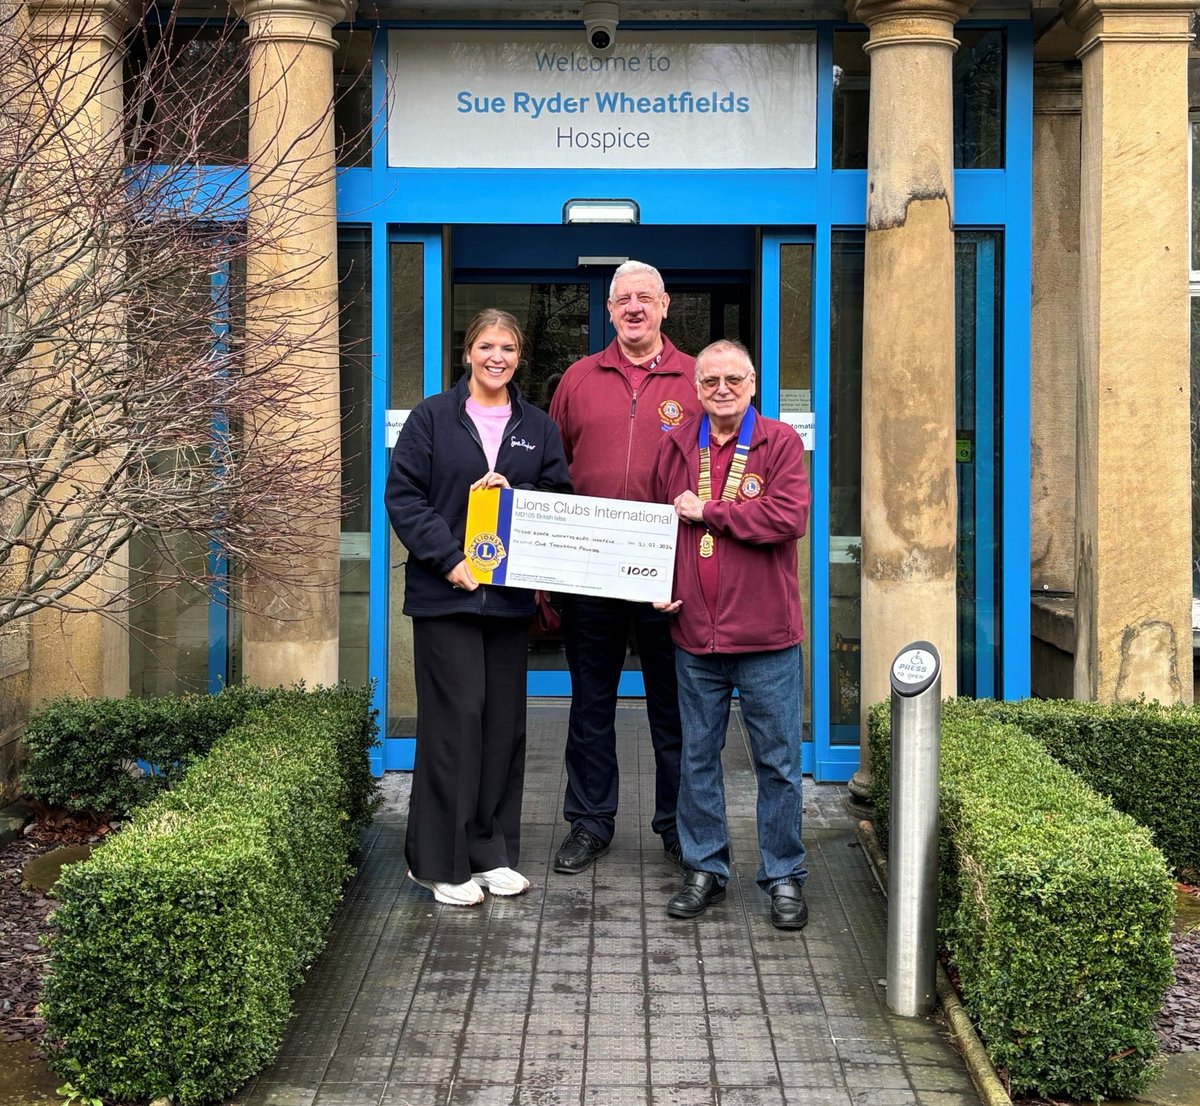 We want to say a big thank you to Garforth and District Lion Club who have donated £1,000 to go towards our garden renovation, which will be a lovely reflective space to be used by patients and families. We really appreciate their ongoing support.